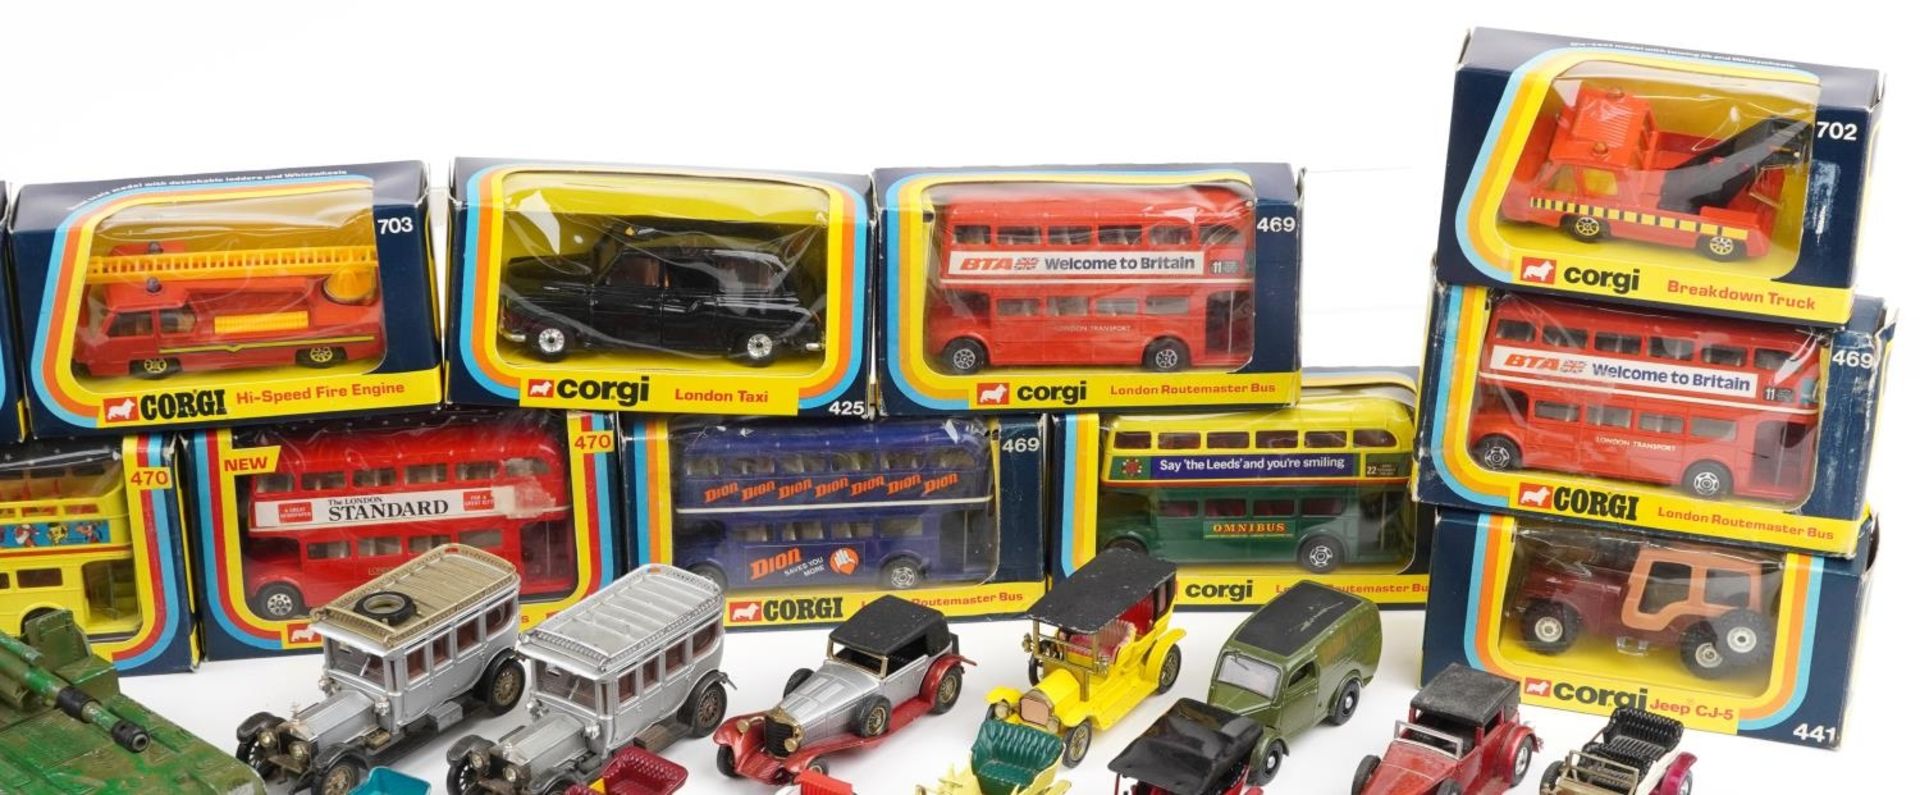 Vintage and later diecast vehicles, some with boxes including Corgi advertising and Dinky army - Image 3 of 5